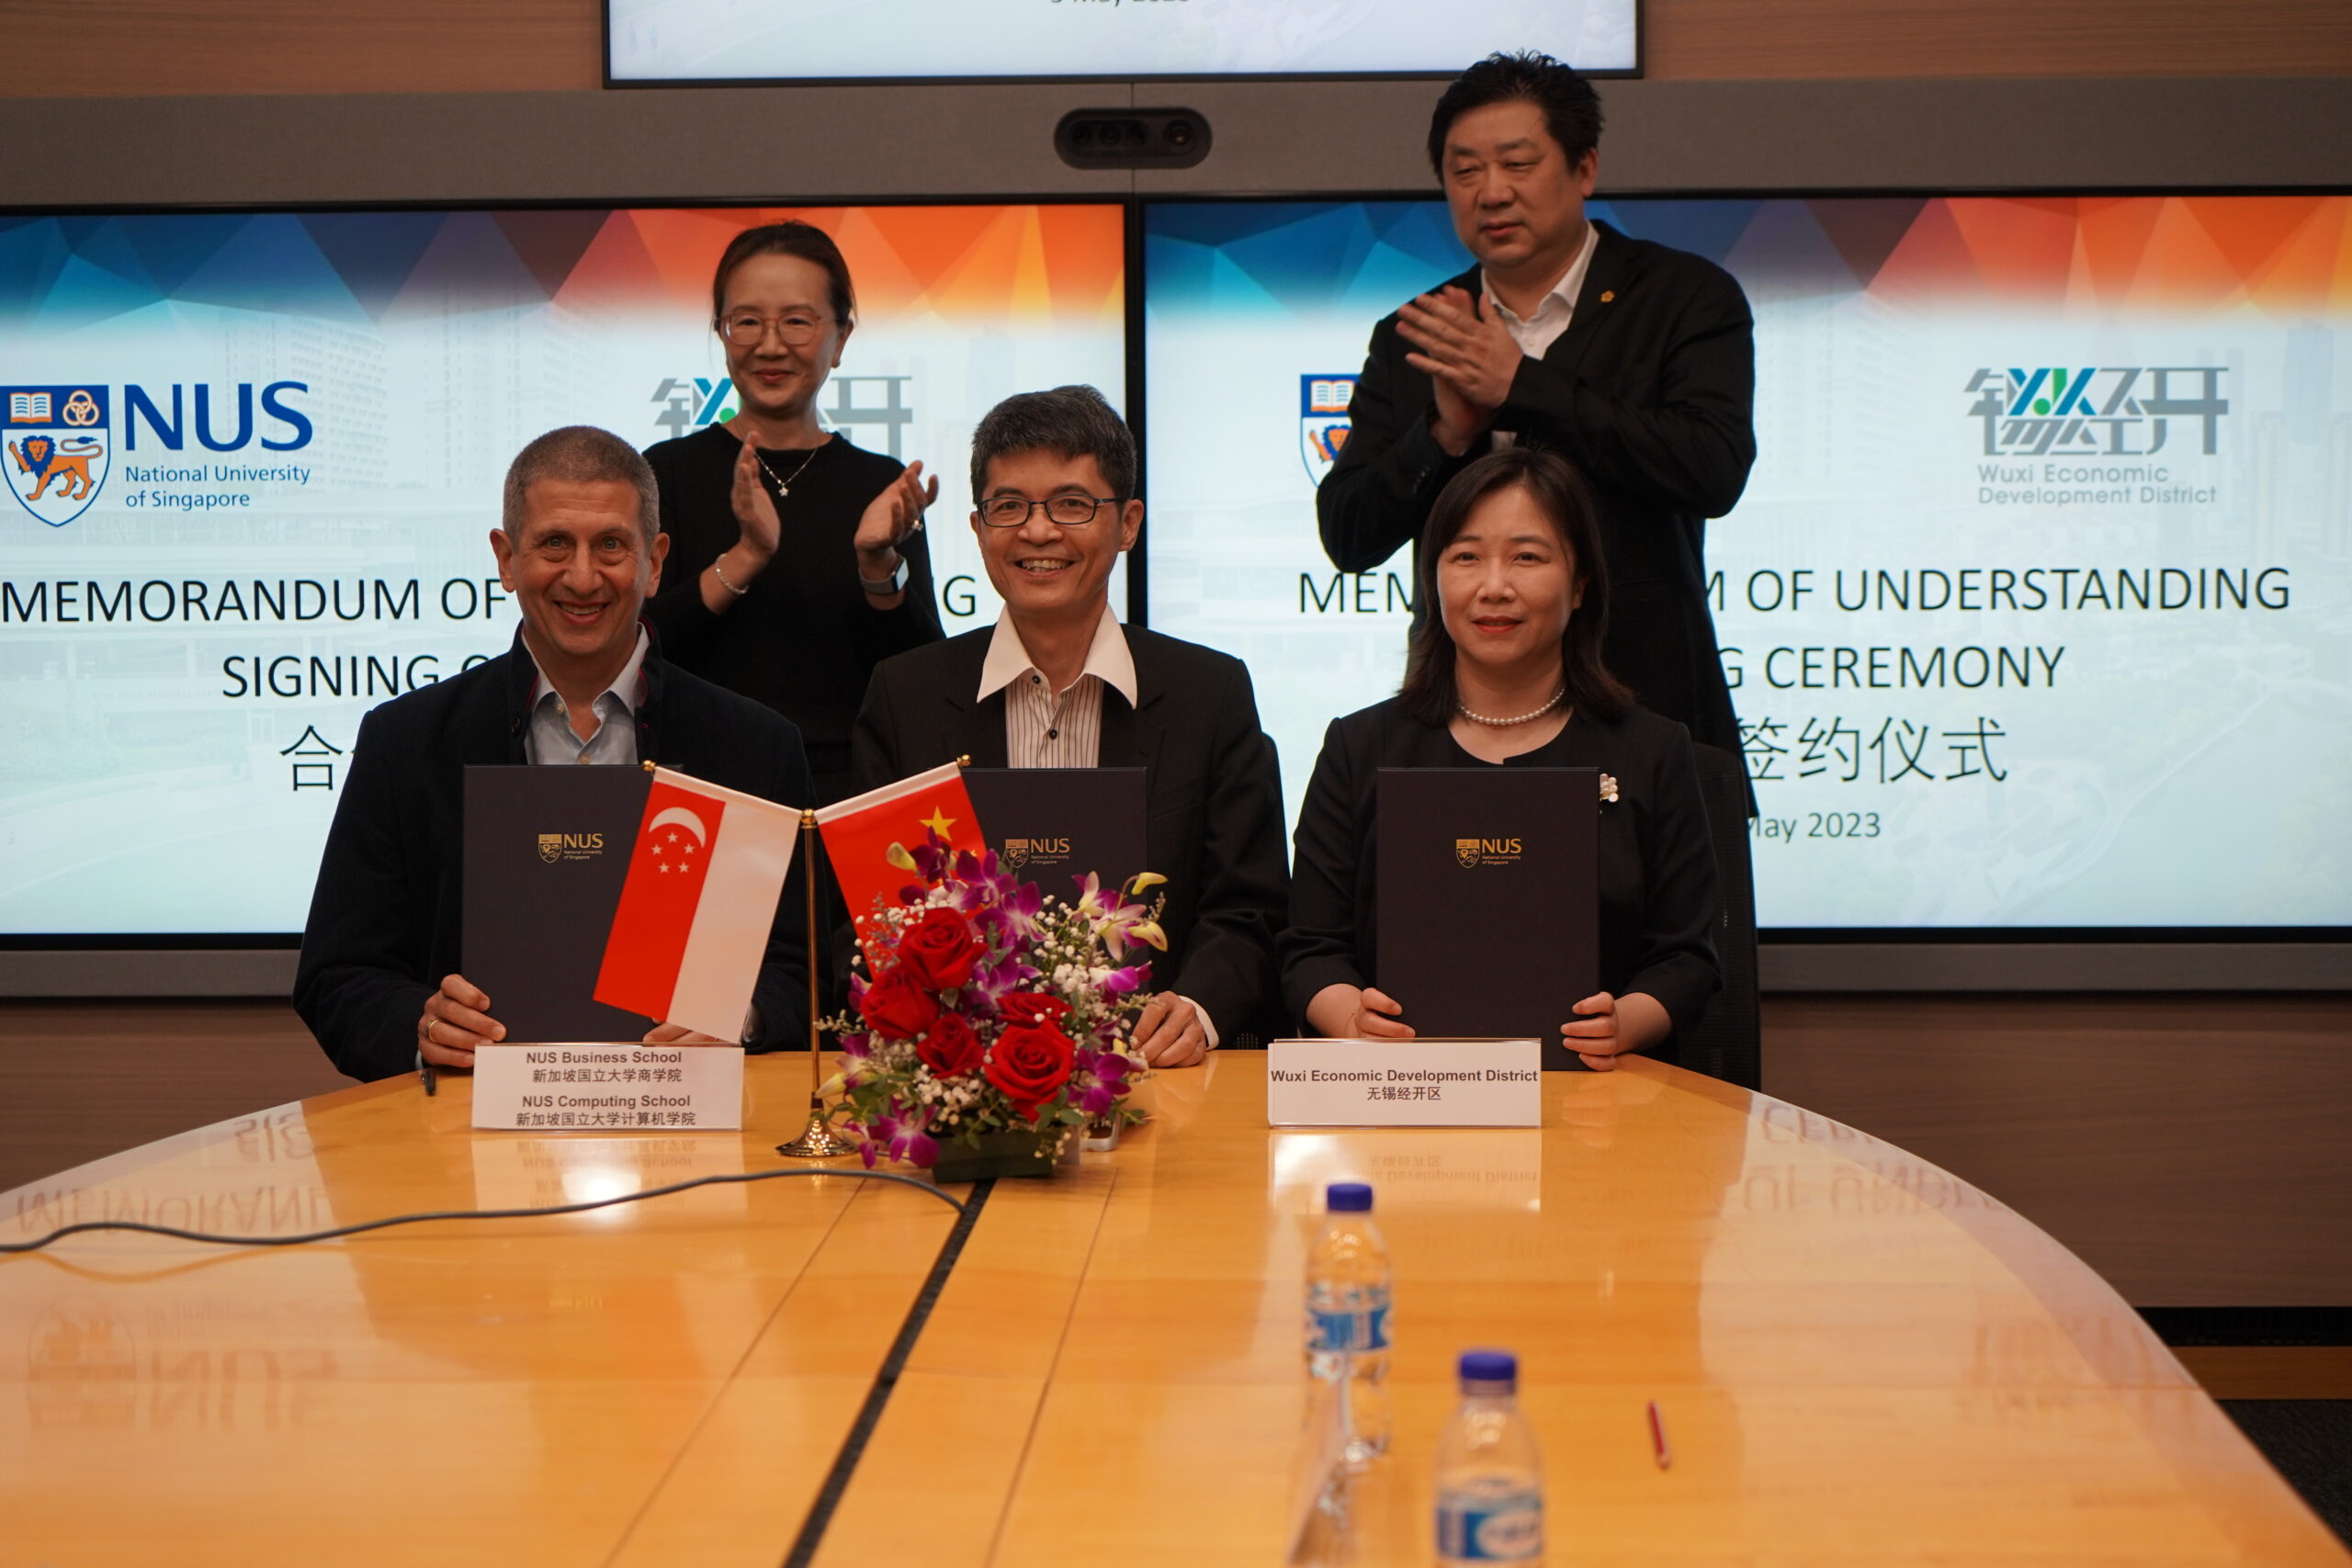 (Front row from left) Prof Andrew Rose, Dean of NUS Business School, Prof Tan Kian Lee, Dean of NUS School of Computing and Ms Yan Qin, Deputy Director of the Management Committee in Wuxi Economic Development Zone signed the MOU, witnessed by Prof Susanna Leong (back row left) and Mr Zhao Jianjun. 